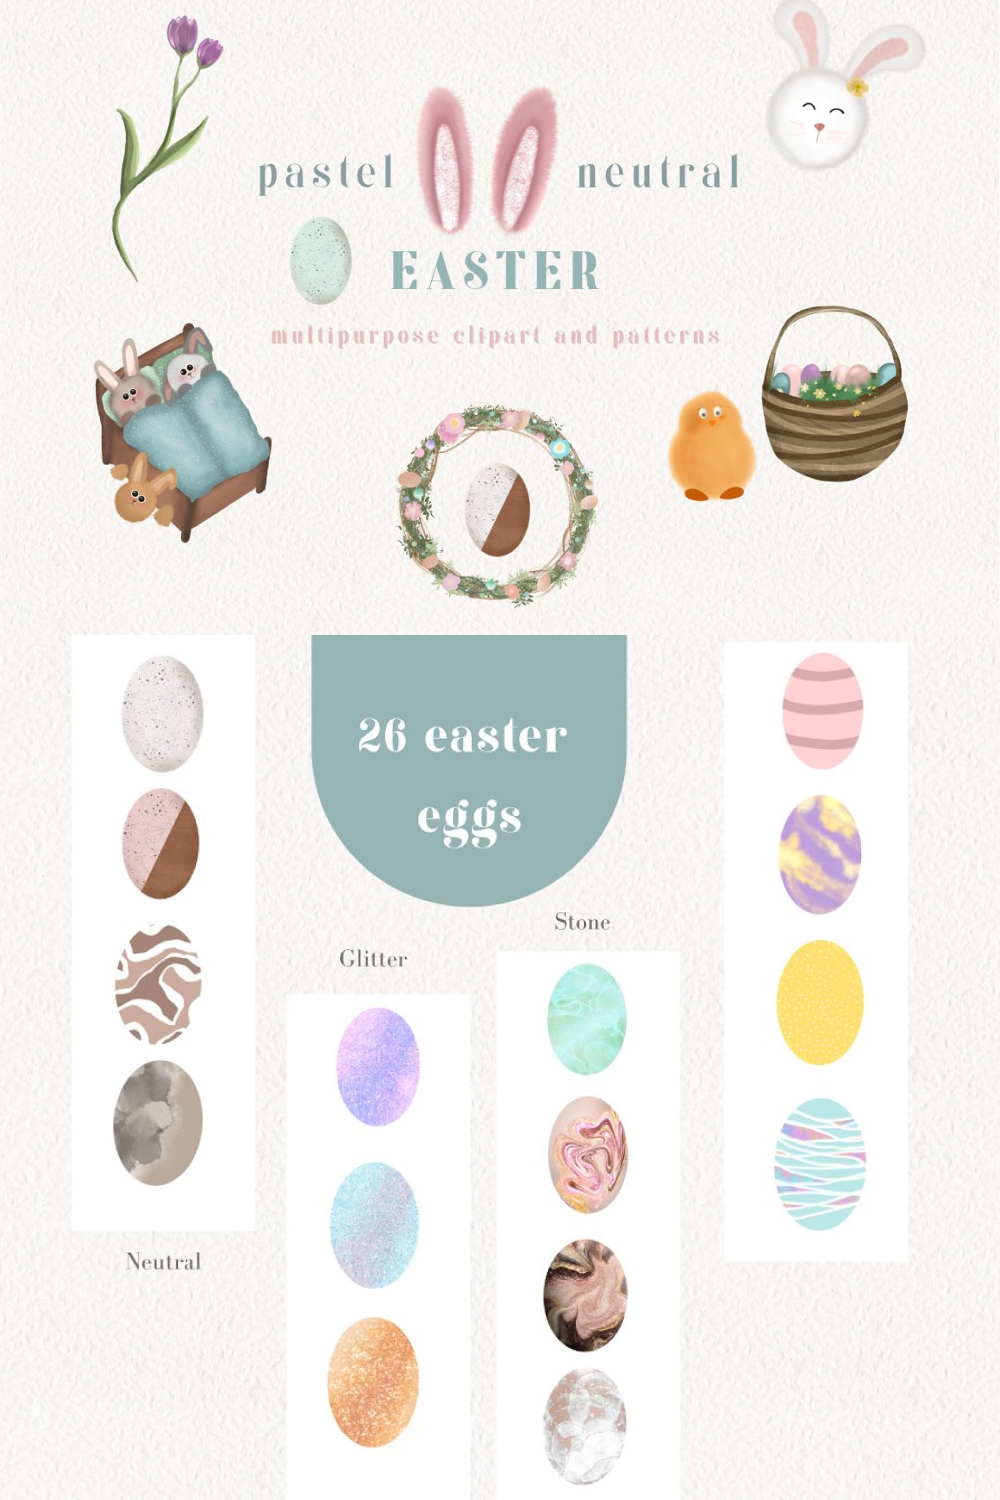 pastel neutral spring easter clipart 1000x1500 785